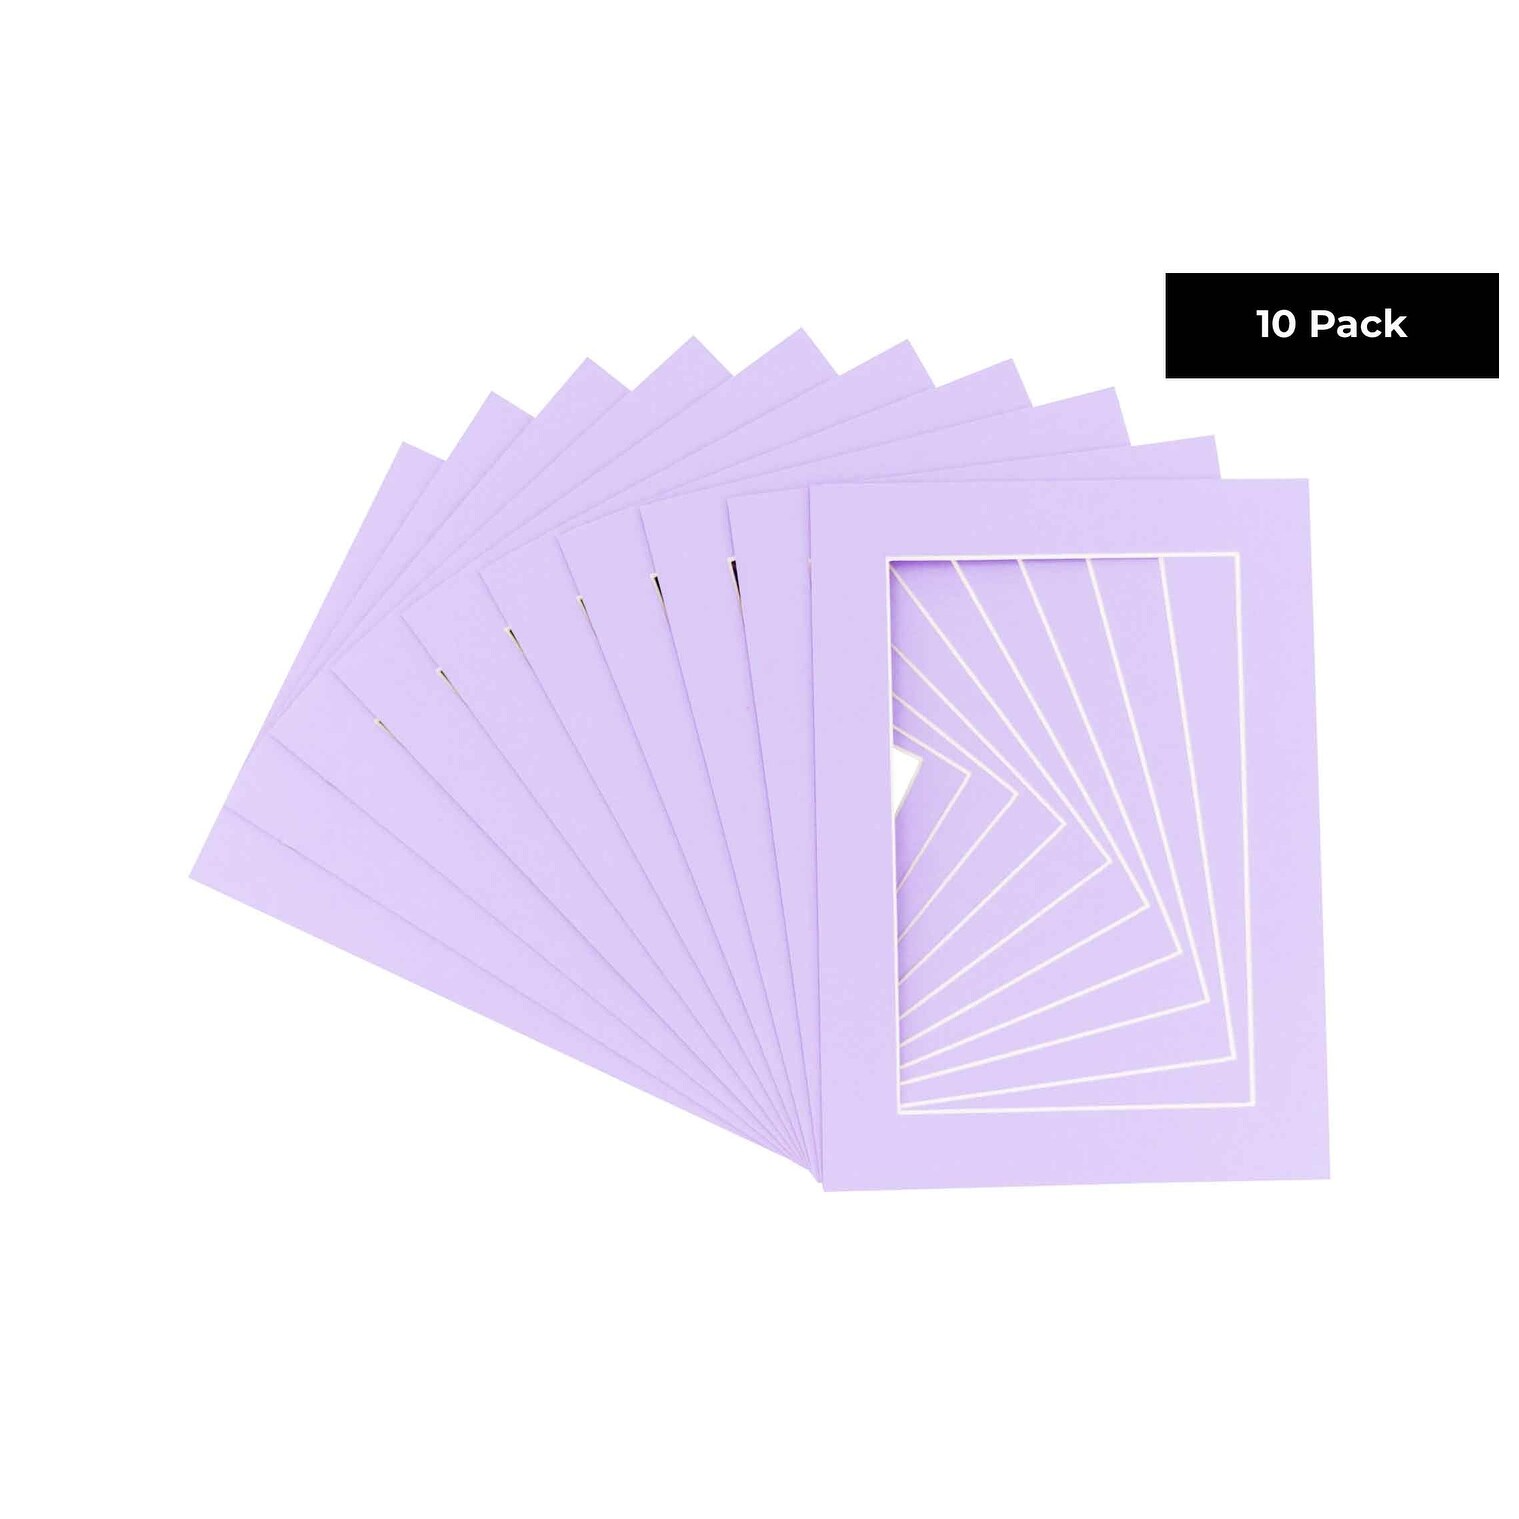 Pack of Ten 12x16 Mats Bevel Cut for 11x12 Photos - Acid Free Dark Purple Precut Matboards for Pictures, Photos, Framing